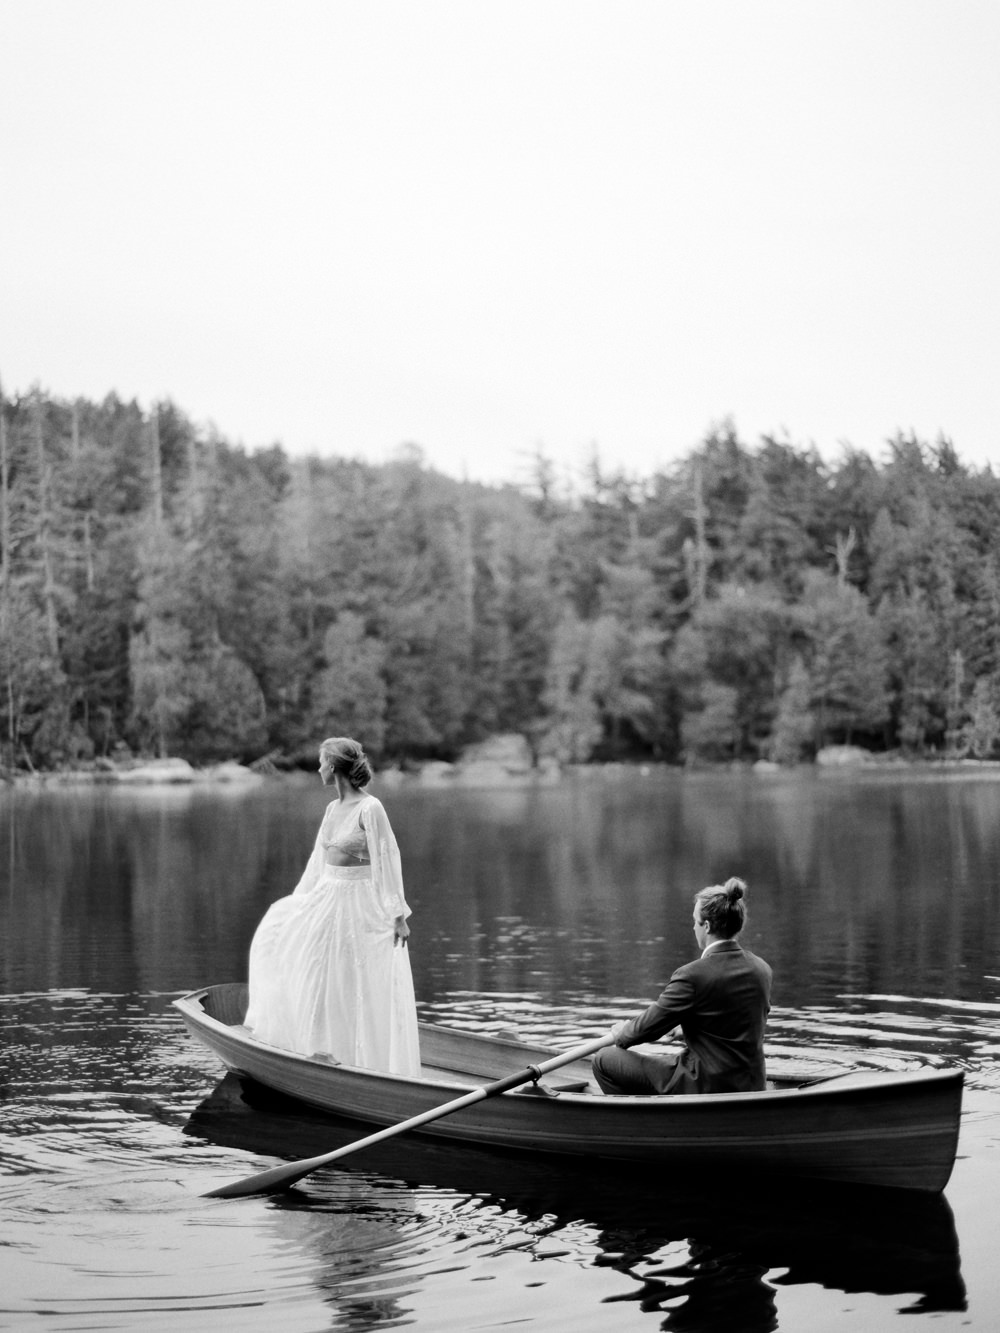 bw photo of couple in row boat paddling to elope in Adirondacks by Mary Dougherty | film photography workshop